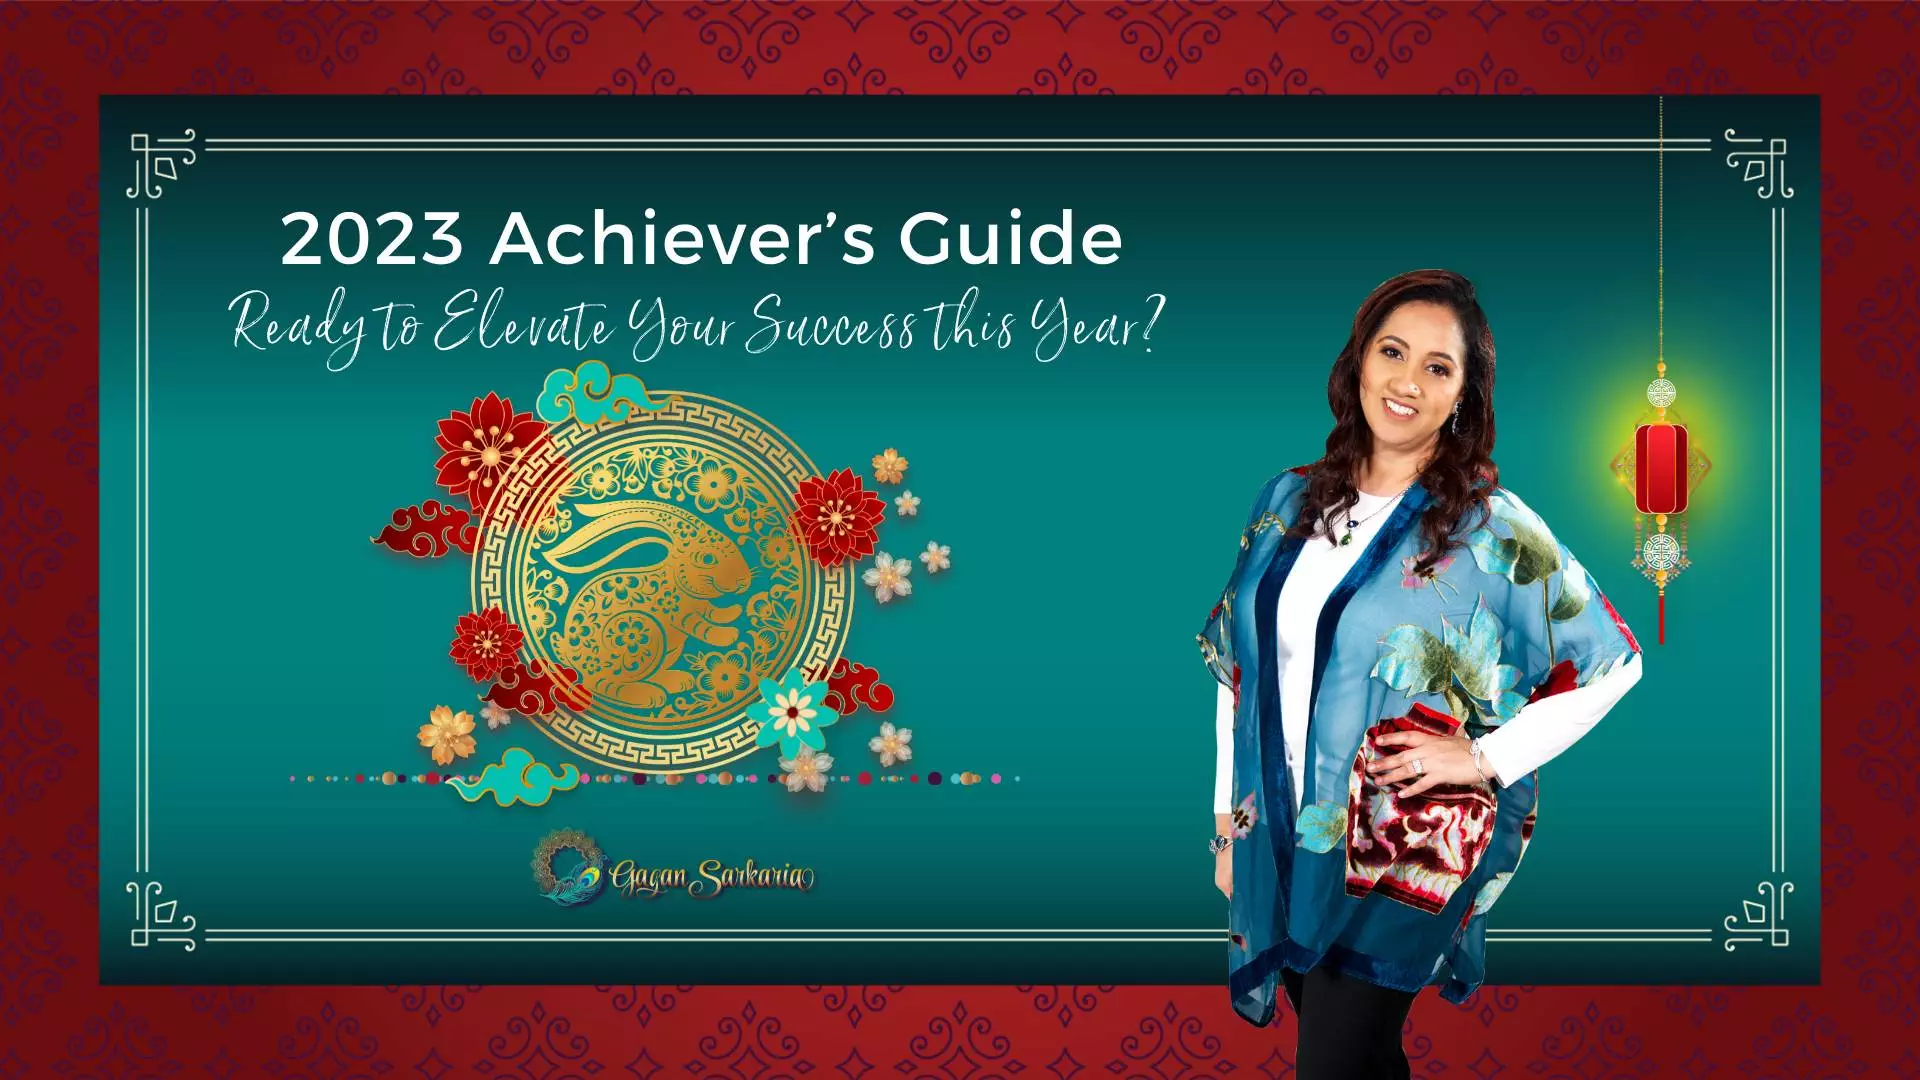 2023 Achievers Guide Free Download 